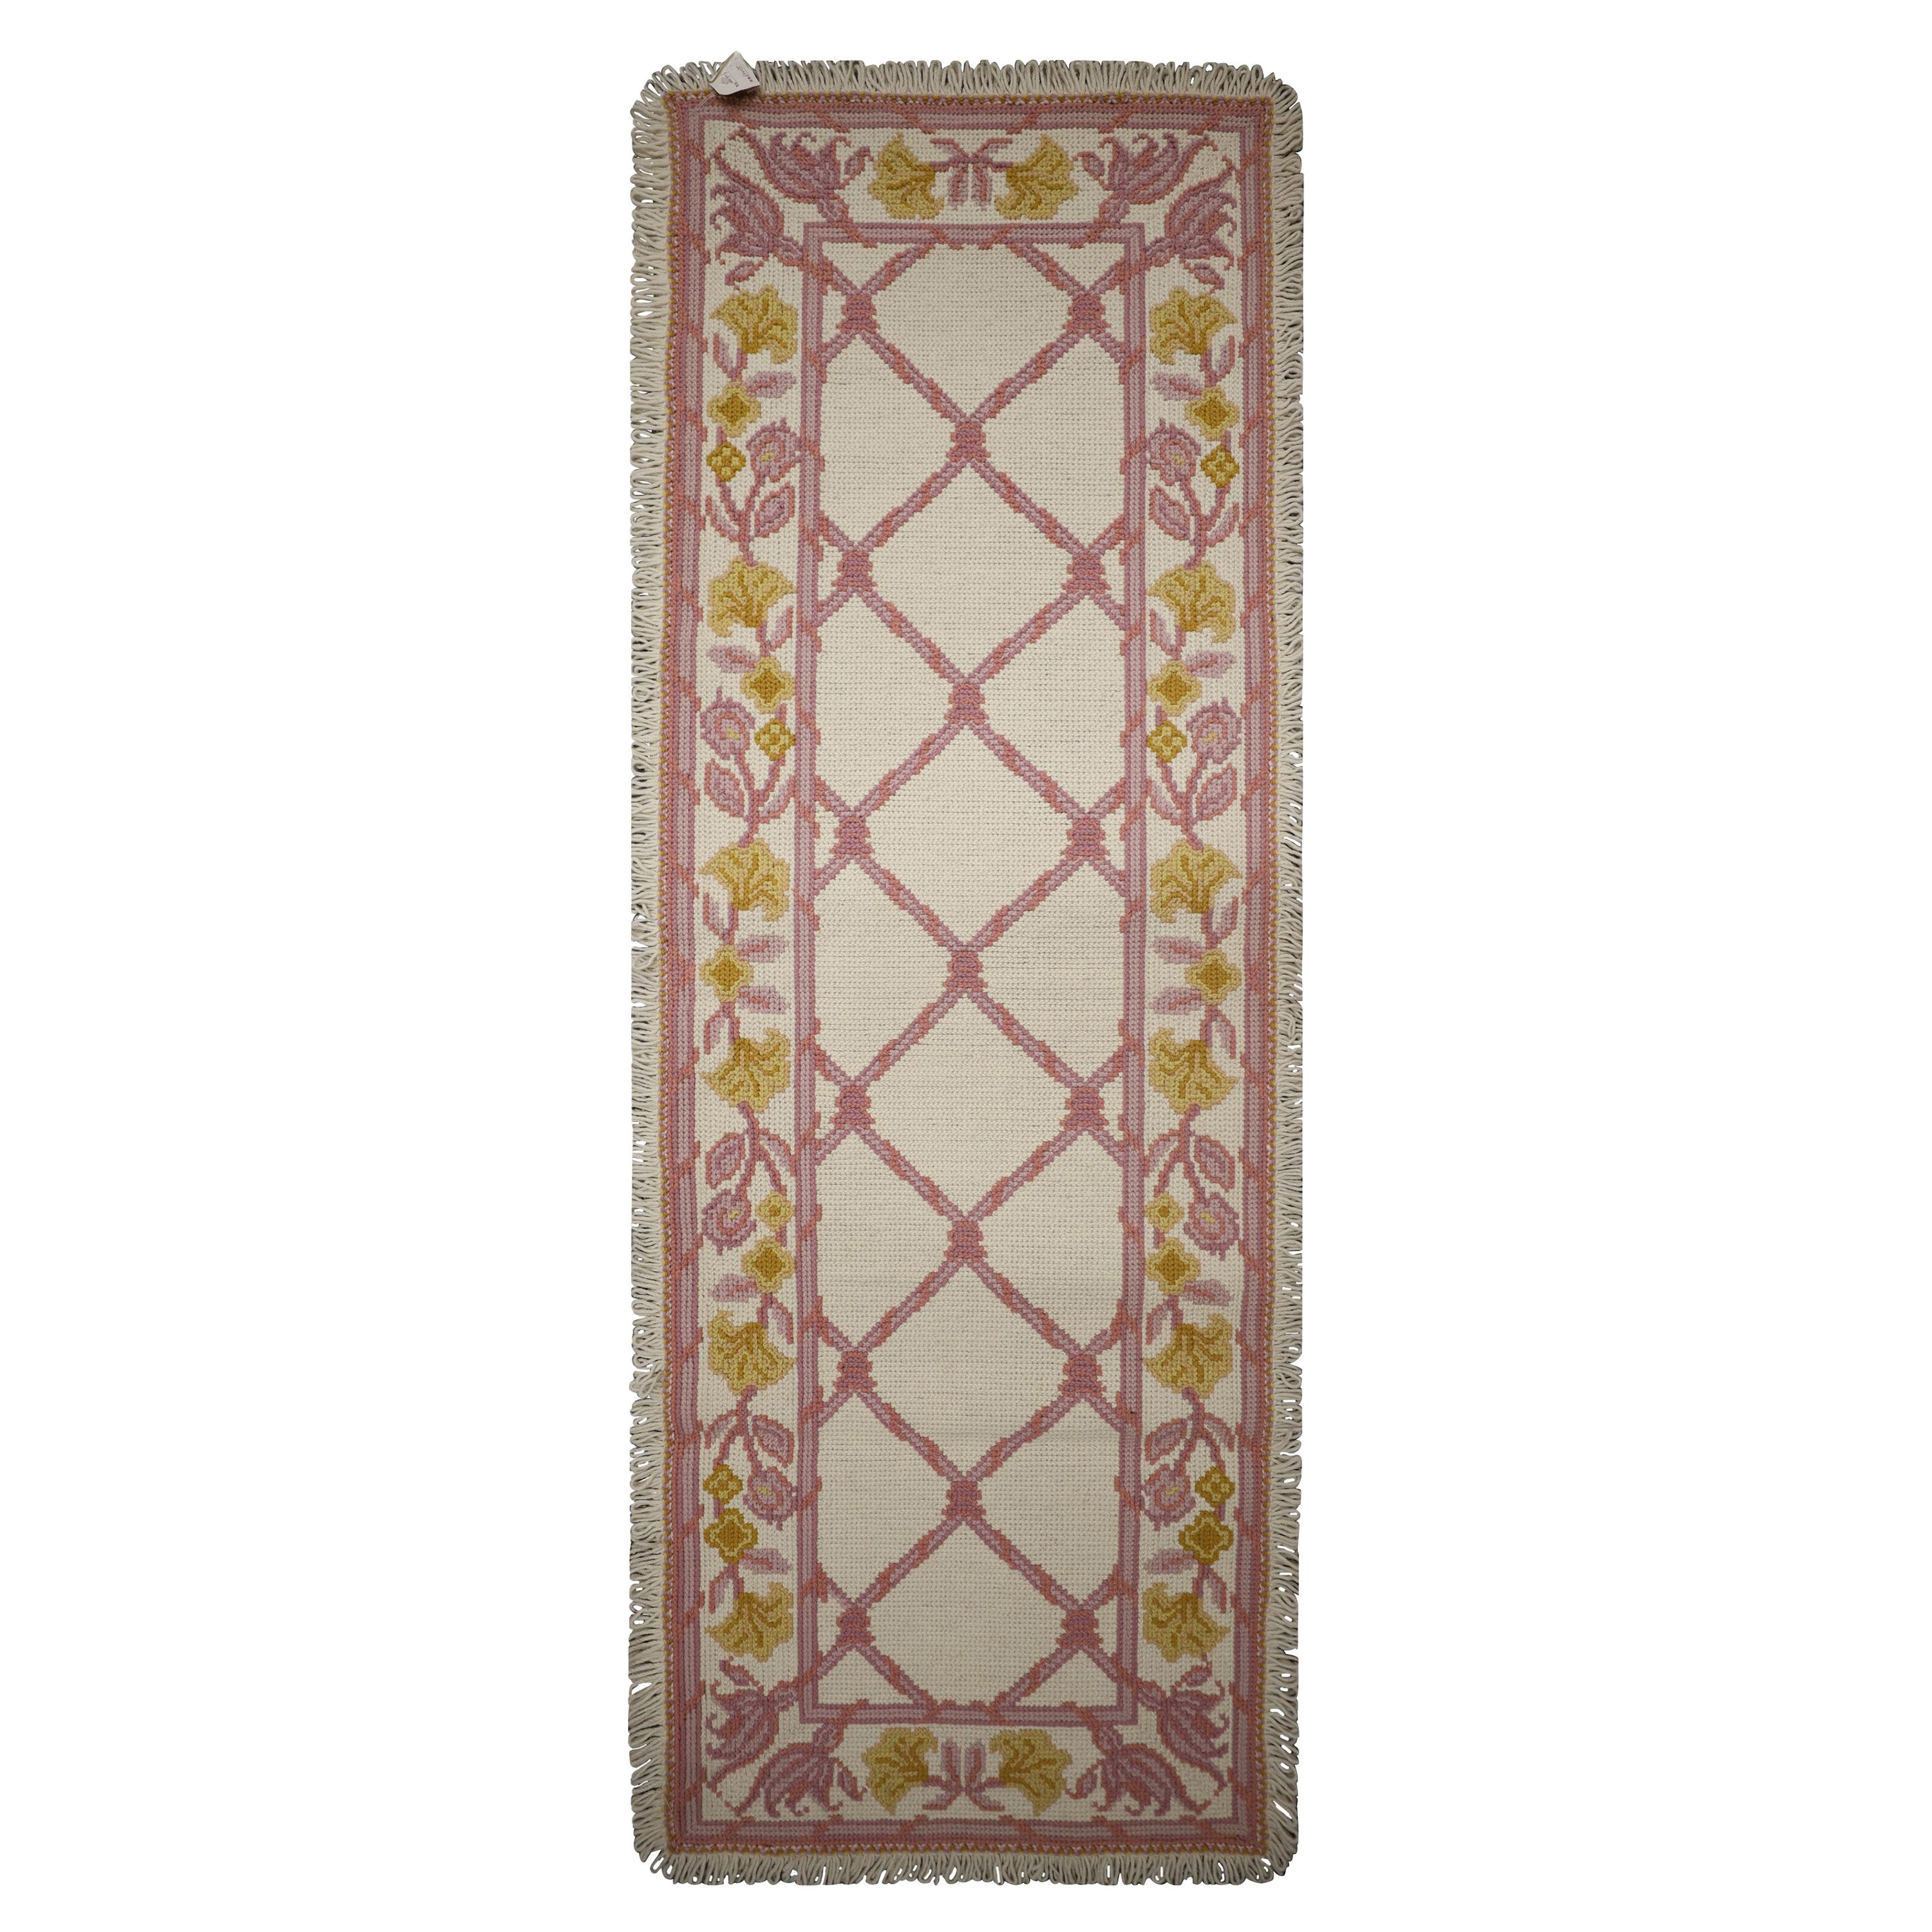 Handwoven Oriental Area Rug, Traditional Needlepoint Carpet Runner For Sale